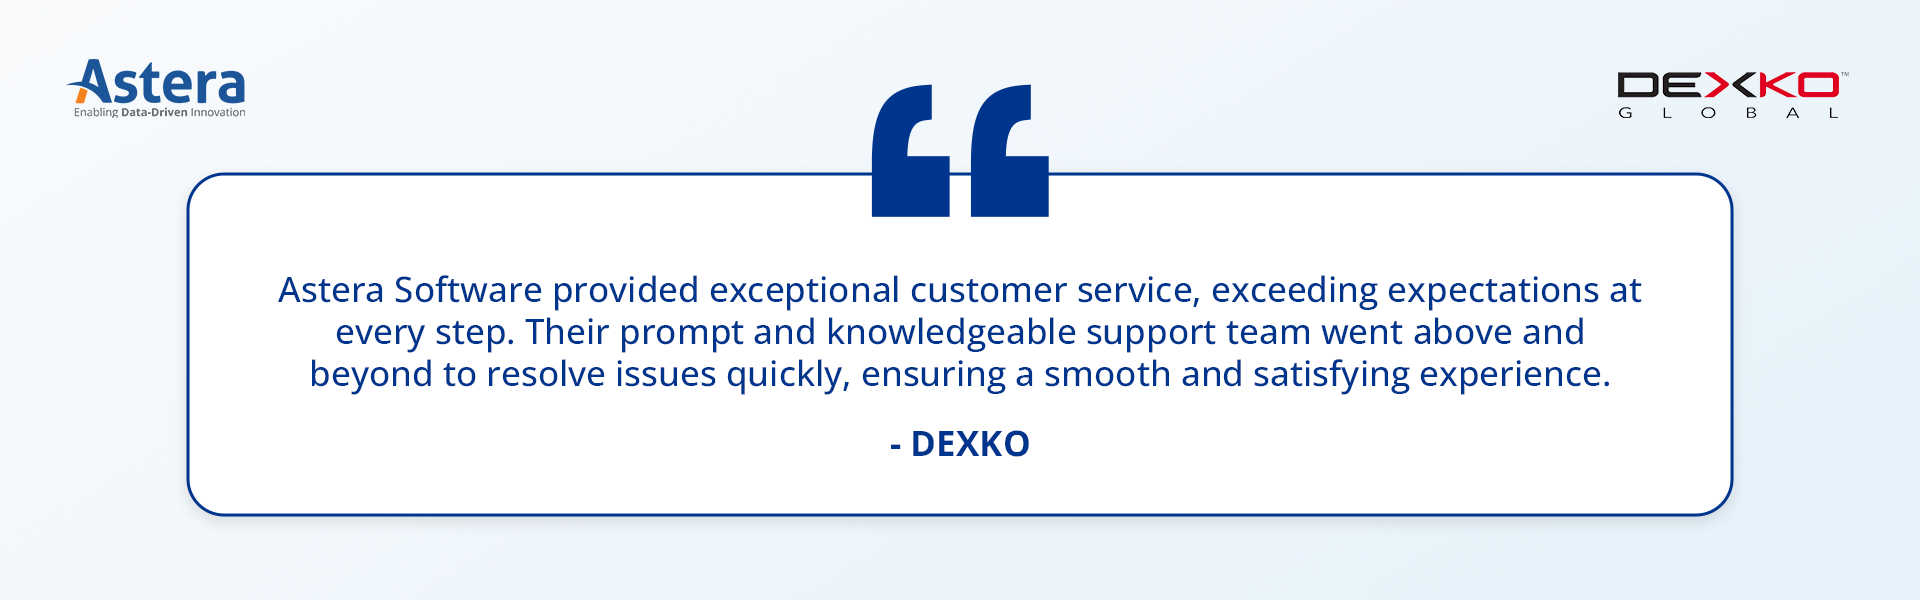 DexKo's customer review for Astera